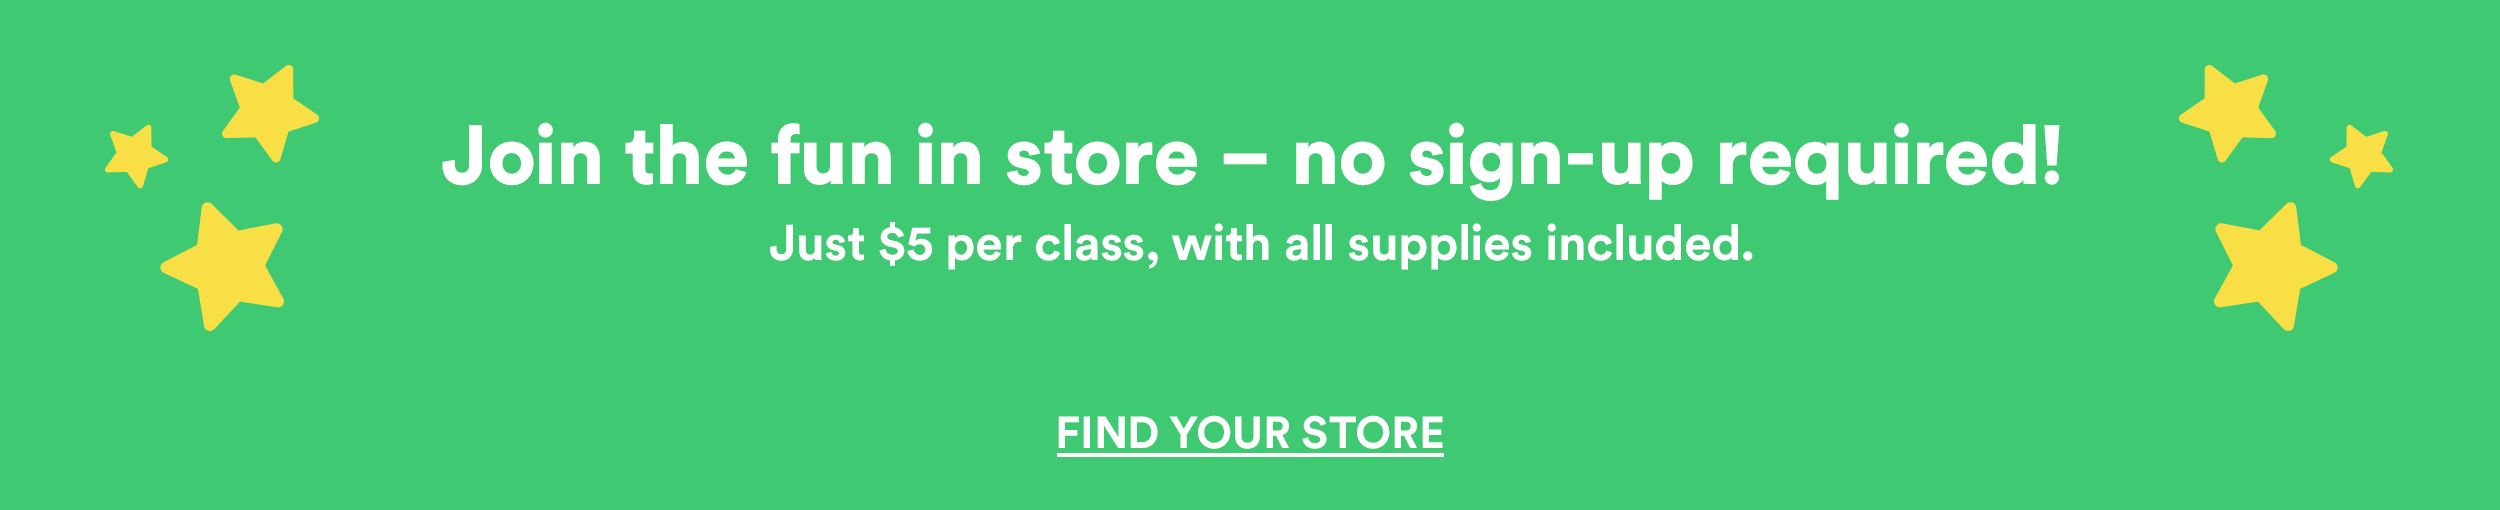 Join the fun in store! Just $5 per class, with all supplies included. Find your store.